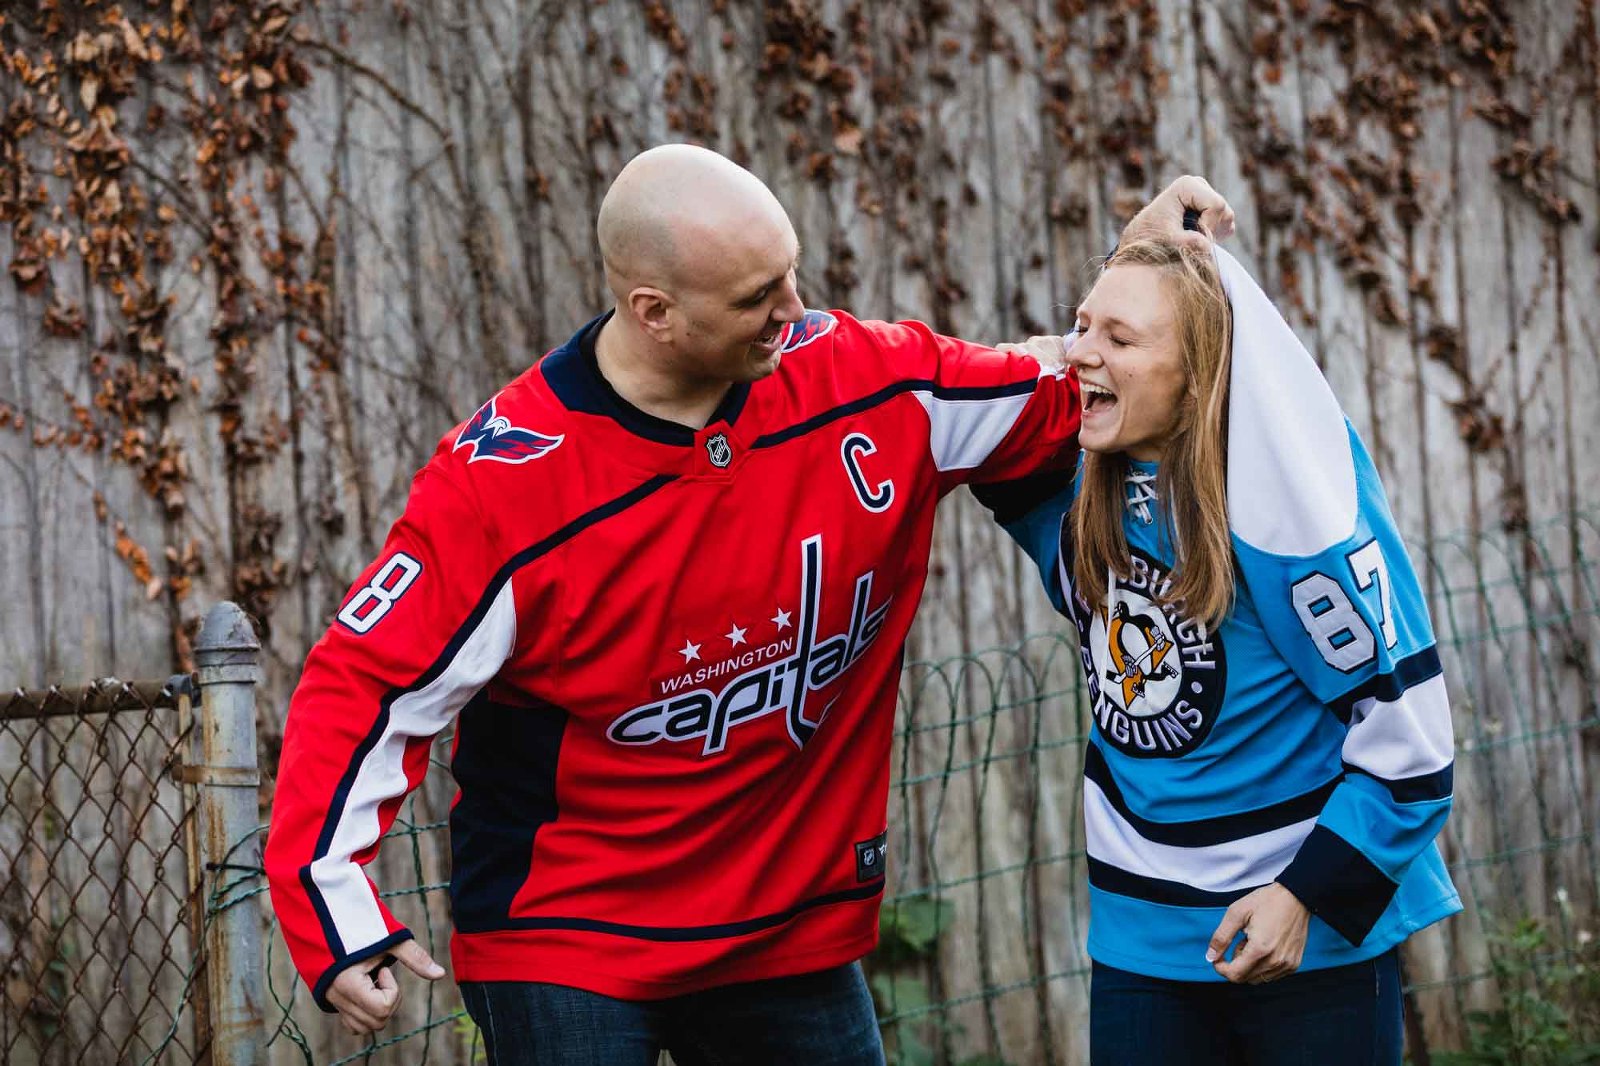 man in capitals jersey pretending to beat woman in penguins jersey, laughing